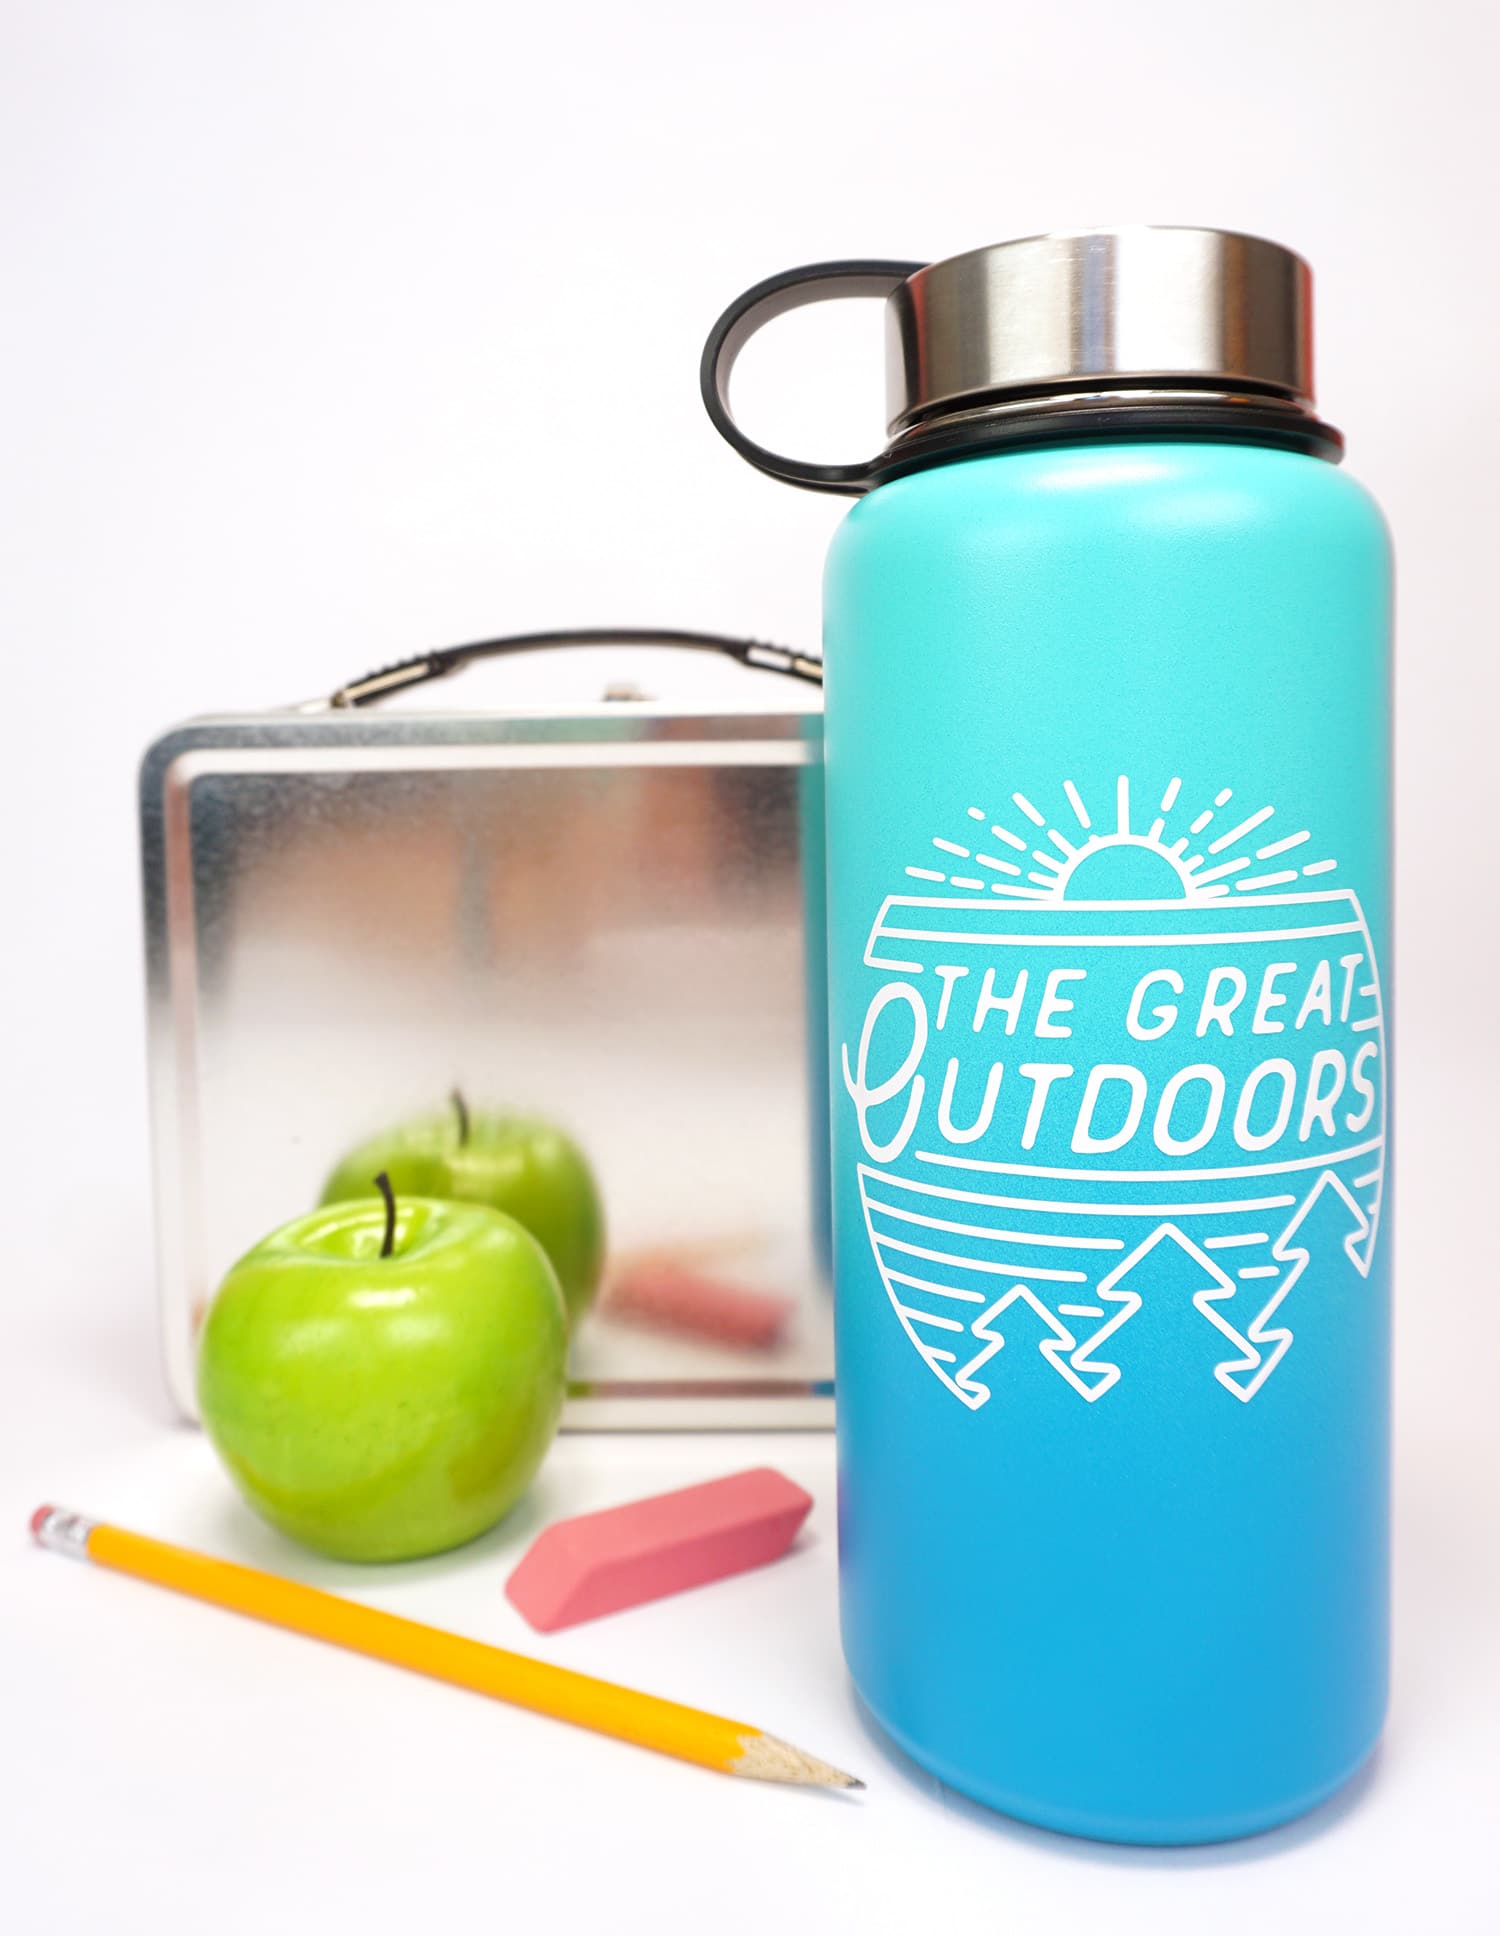 the great outdoors water bottle and lunch items